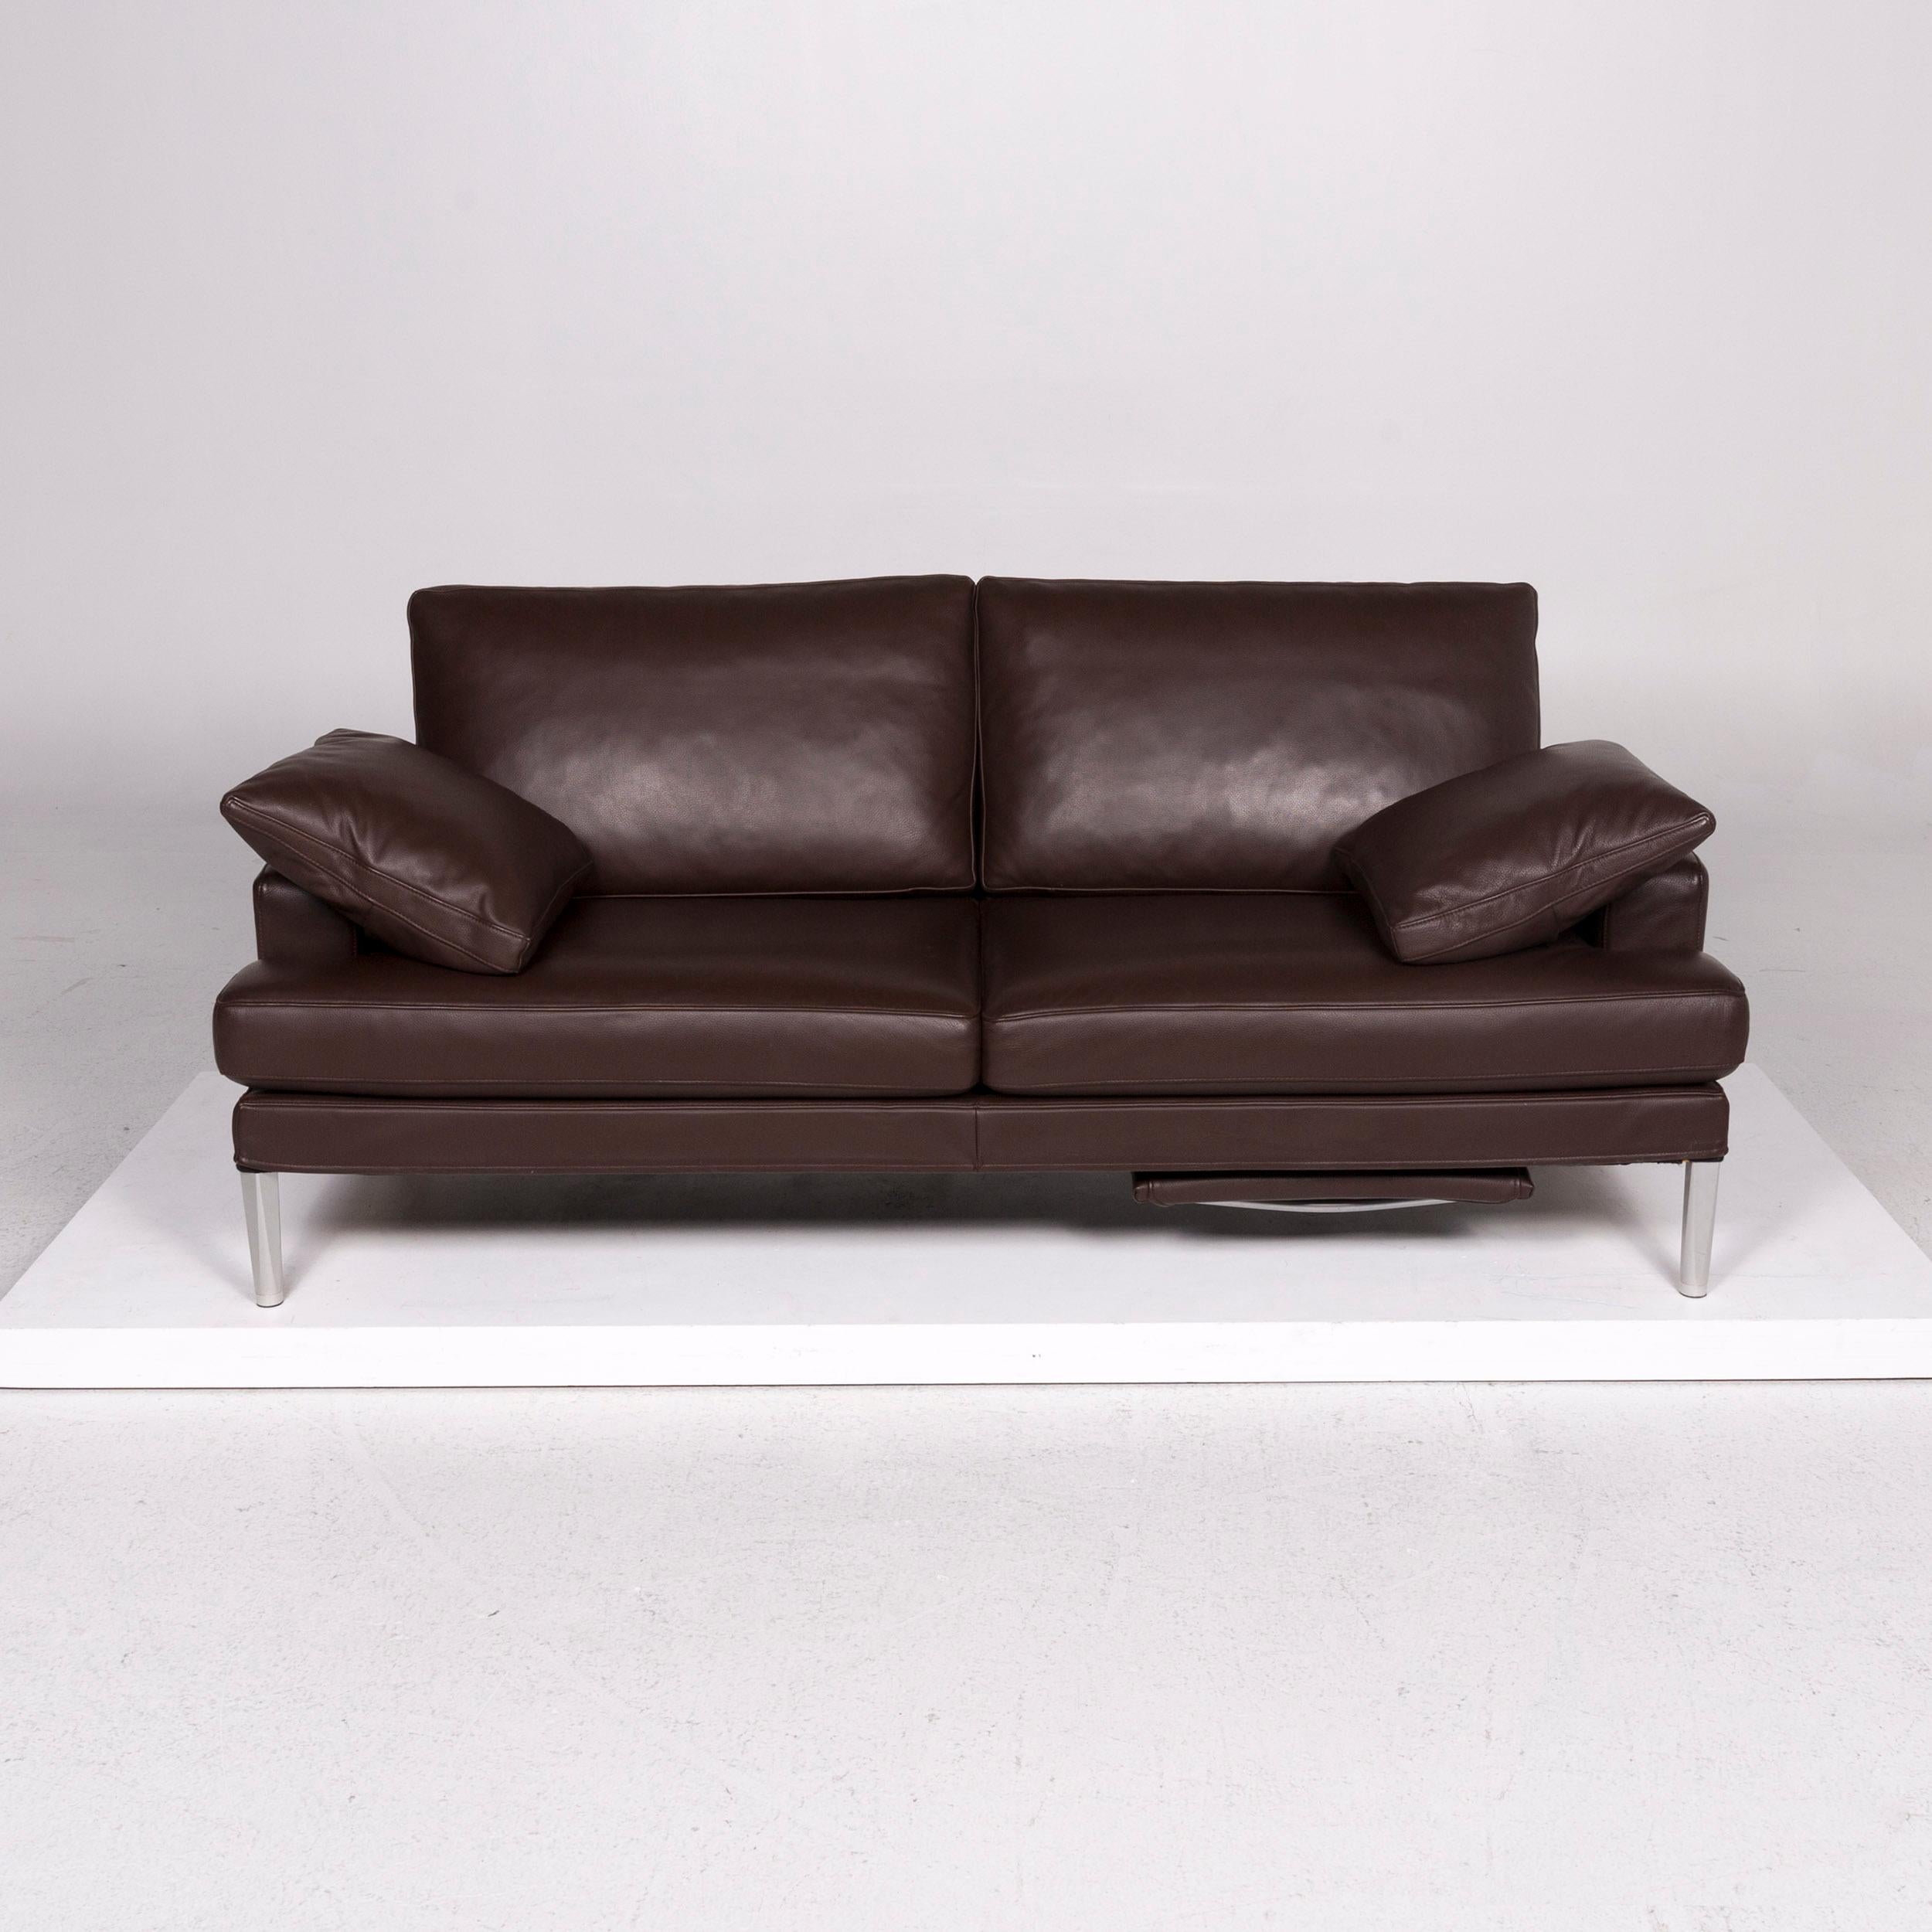 FSM Clarus Leather Sofa Set Brown Dark Brown 1 Three-Seat 1 Two-Seat For Sale 3